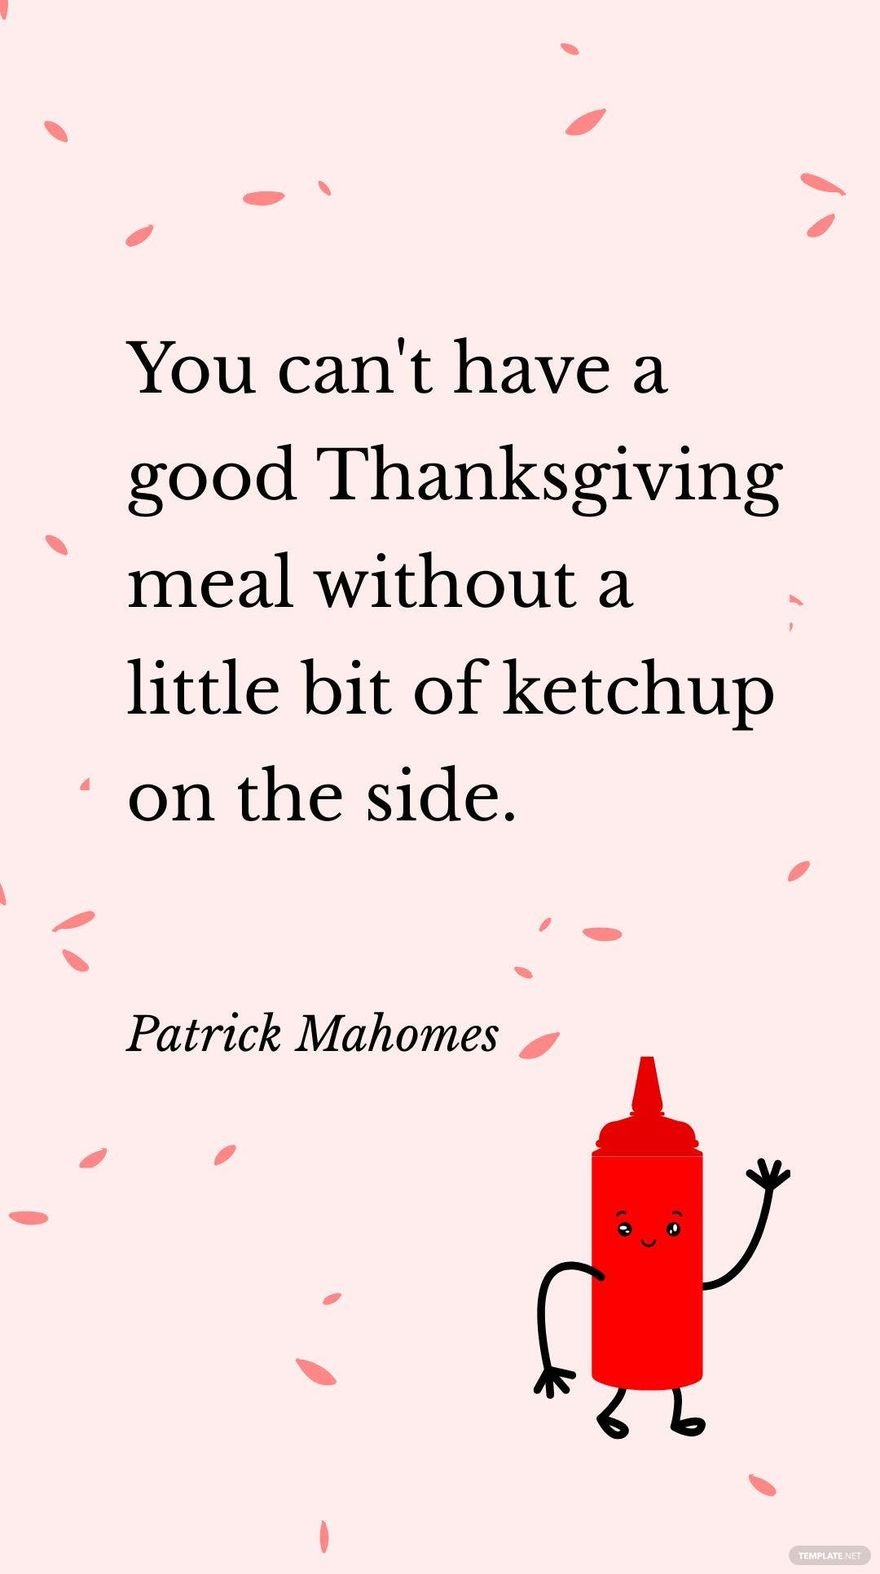 Free Patrick Mahomes - You can't have a good Thanksgiving meal without a little bit of ketchup on the side. in JPG